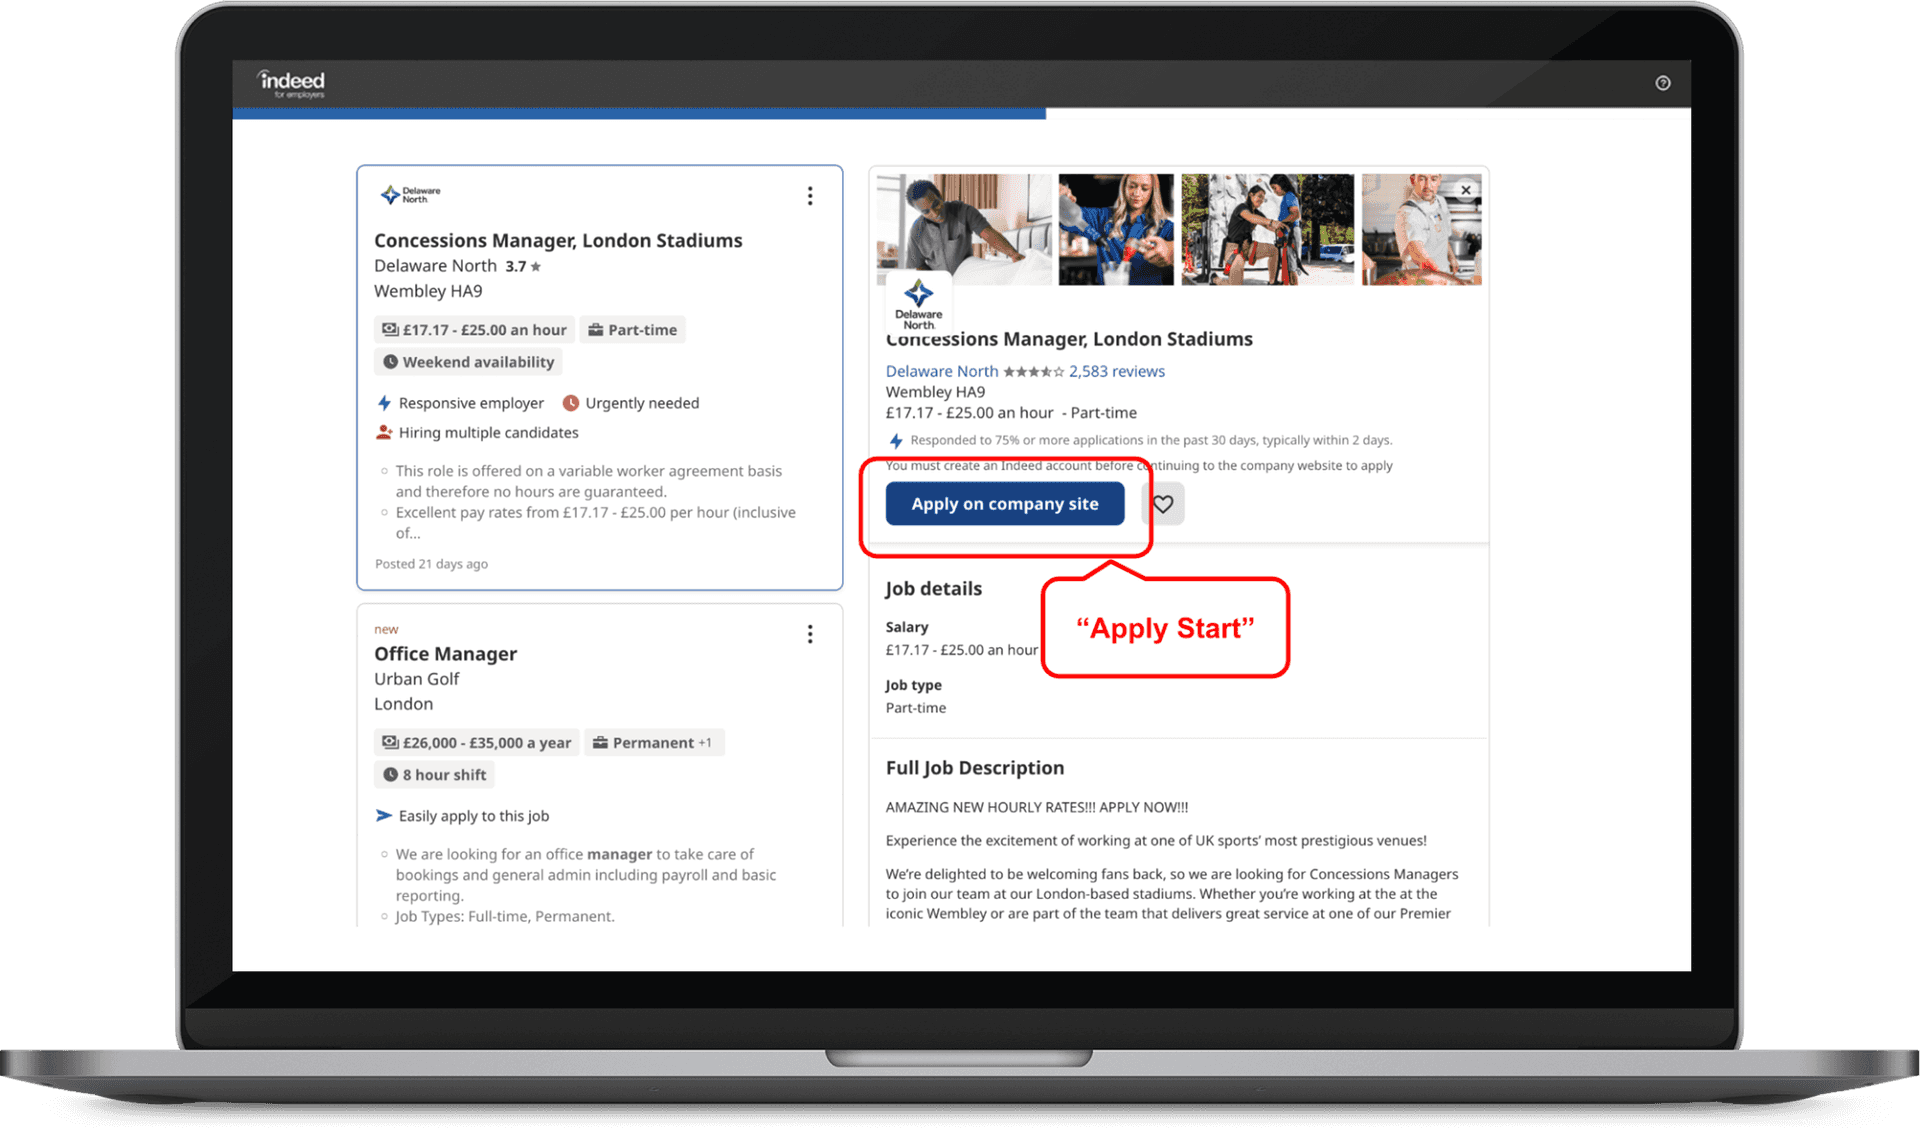 Pricing Model of Indeed Ads - Pay Per Started Application